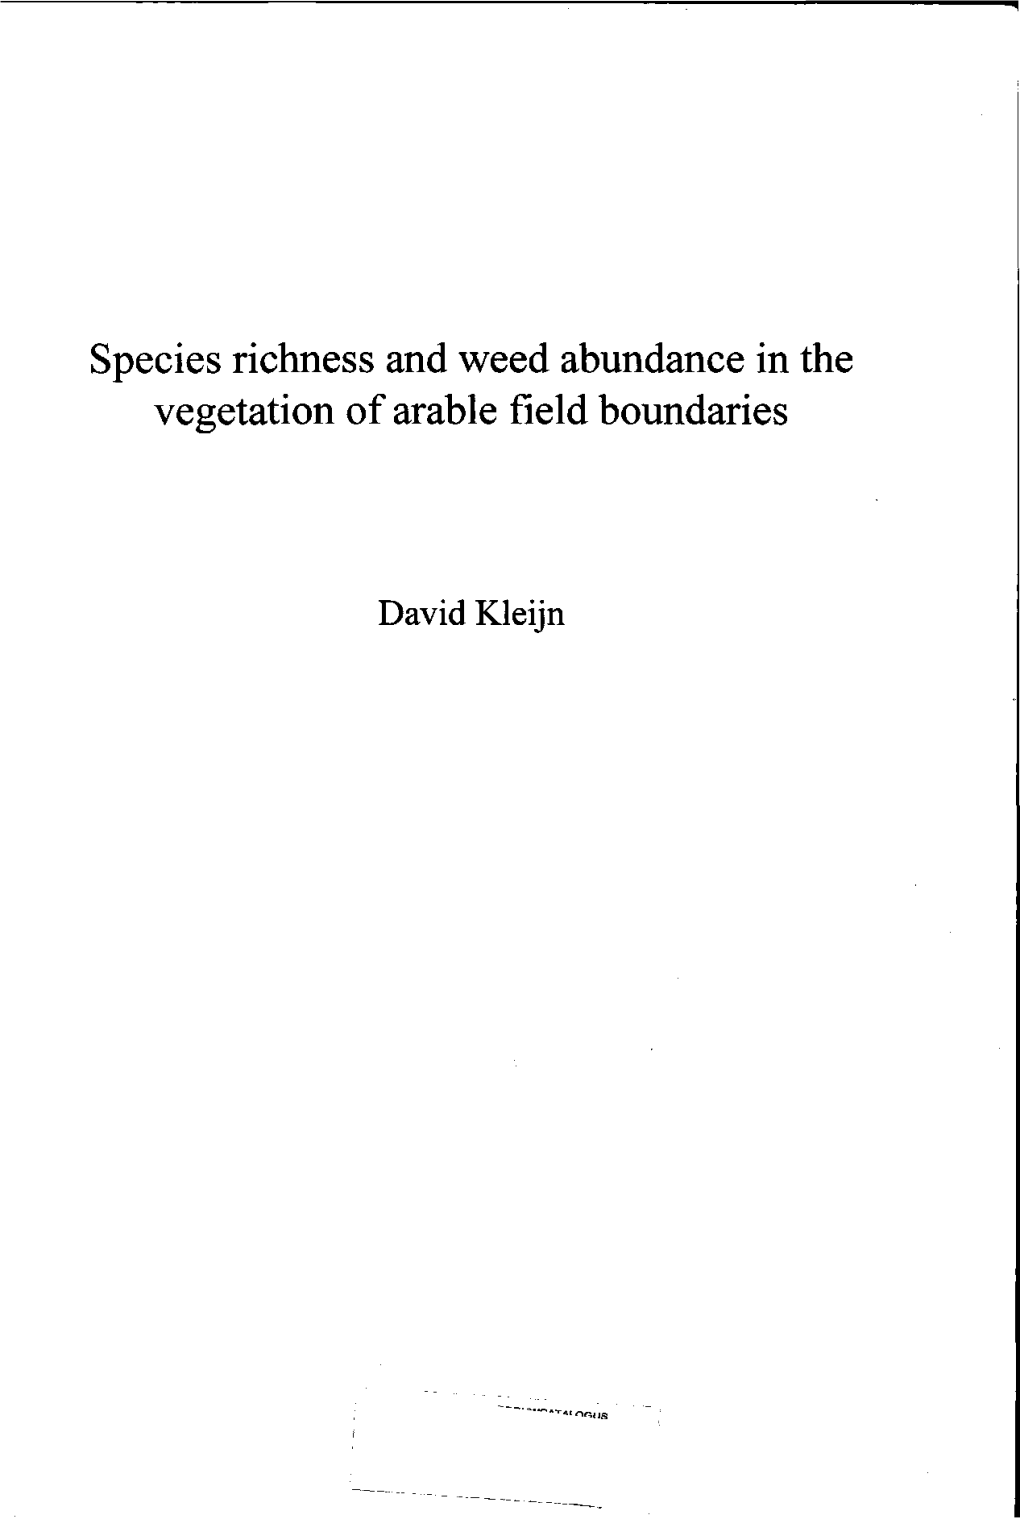 Species Richness and Weed Abundance in the Vegetation of Arable Field Boundaries